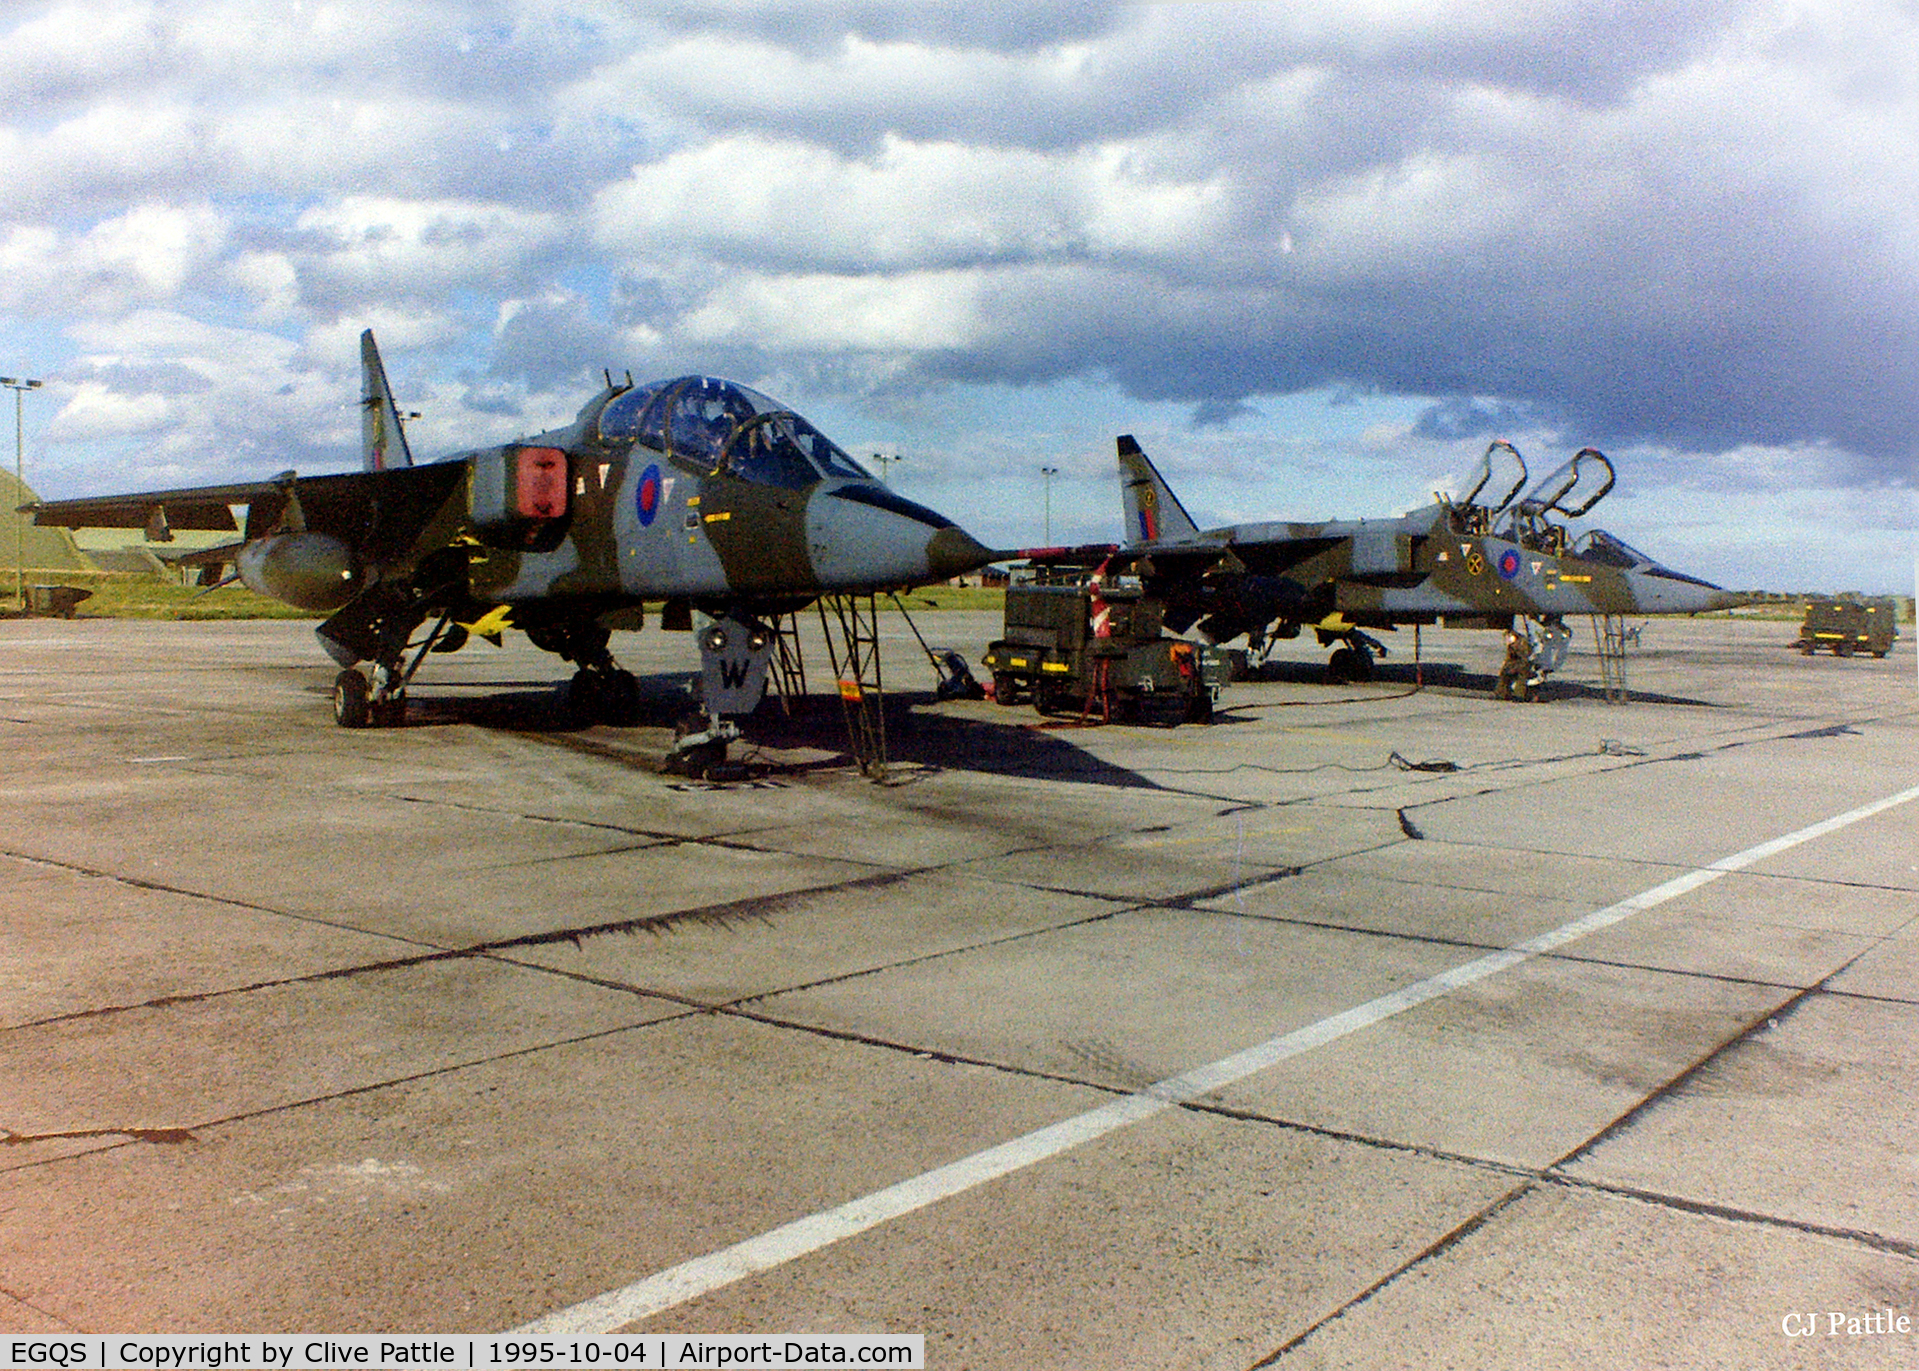 RAF Lossiemouth Airport, Lossiemouth, Scotland United Kingdom (EGQS) - 16 (R) Sqn ramp at RAF Lossiemouth EGQS in October 1995 showing two of the Sqn's Sepecat Jaguar T.2's awaiting their next training sortie.